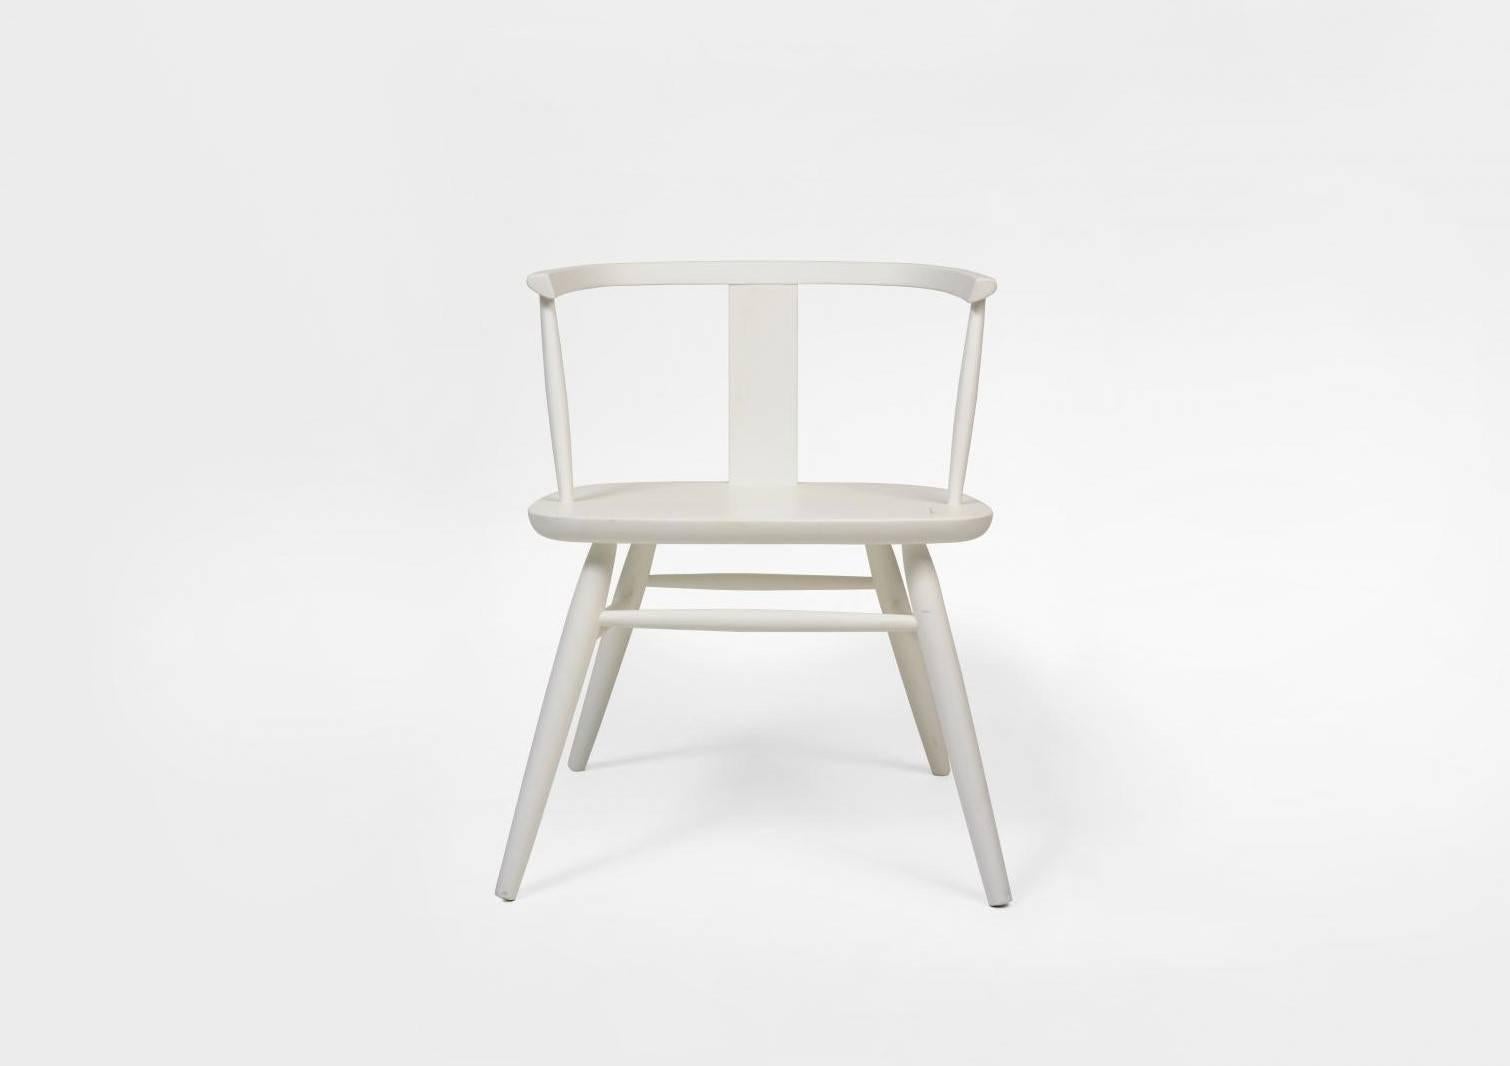 Botswanan Minimal Maun Windsor Dining Chair Handcrafted in Africa by Mabeo Furniture For Sale